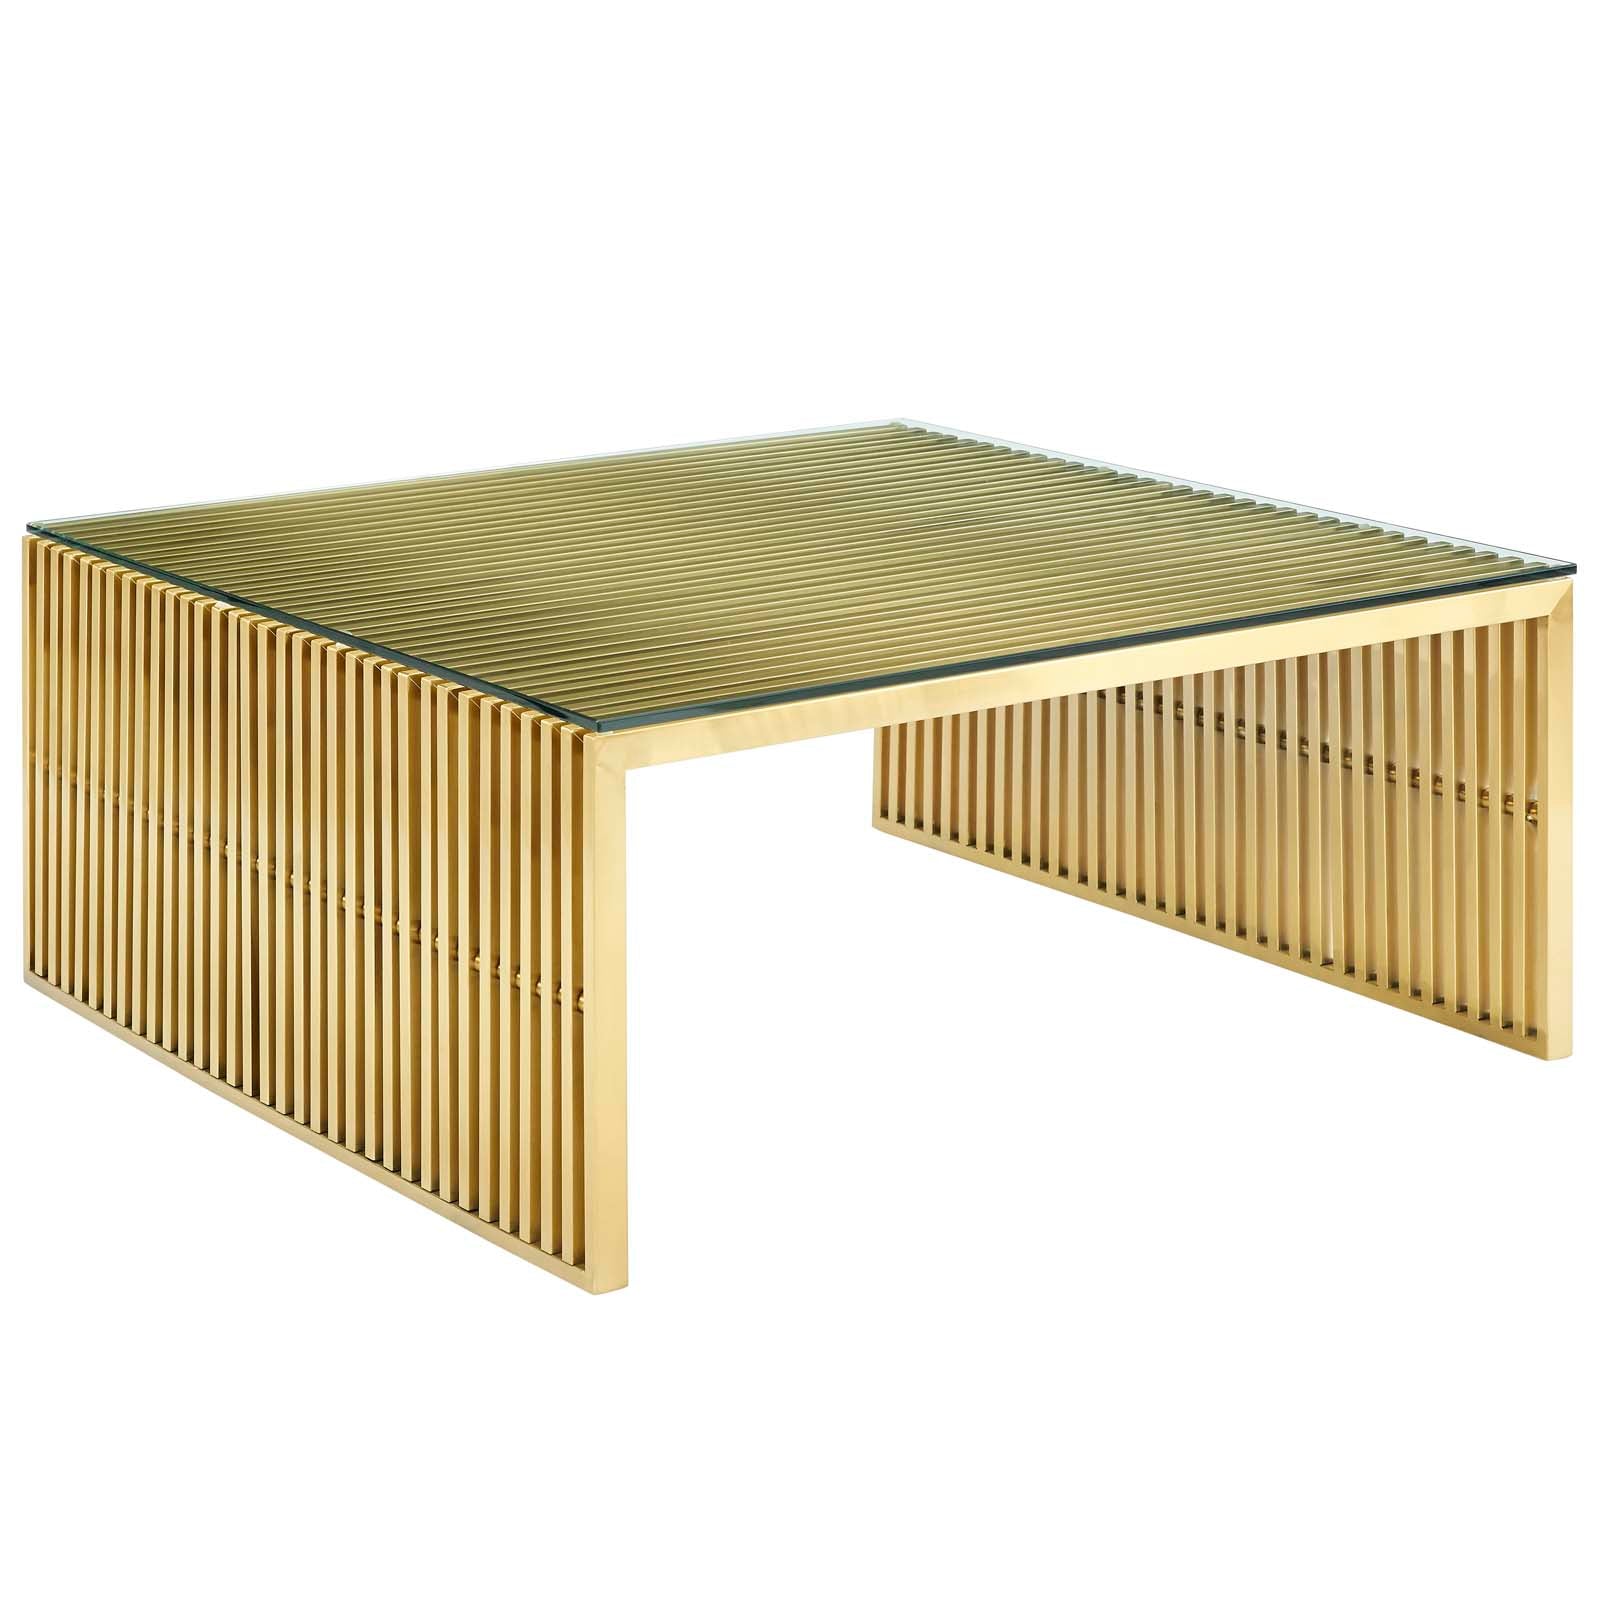 Gridiron Stainless Steel Coffee Table - East Shore Modern Home Furnishings